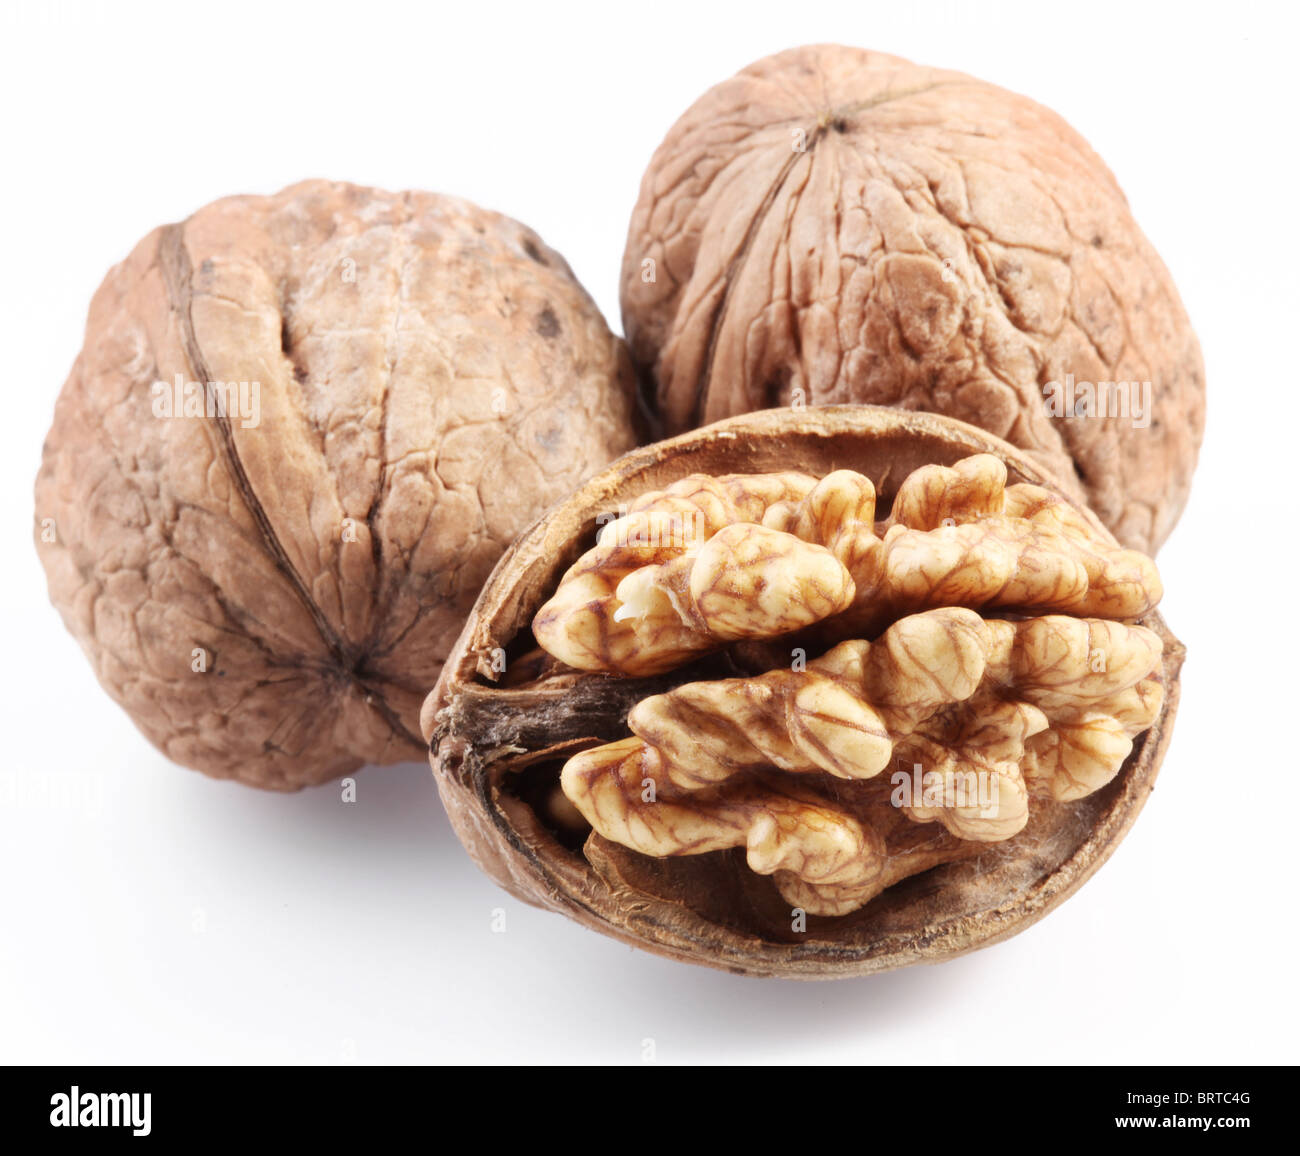 Walnuts isolated on a white background. Stock Photo